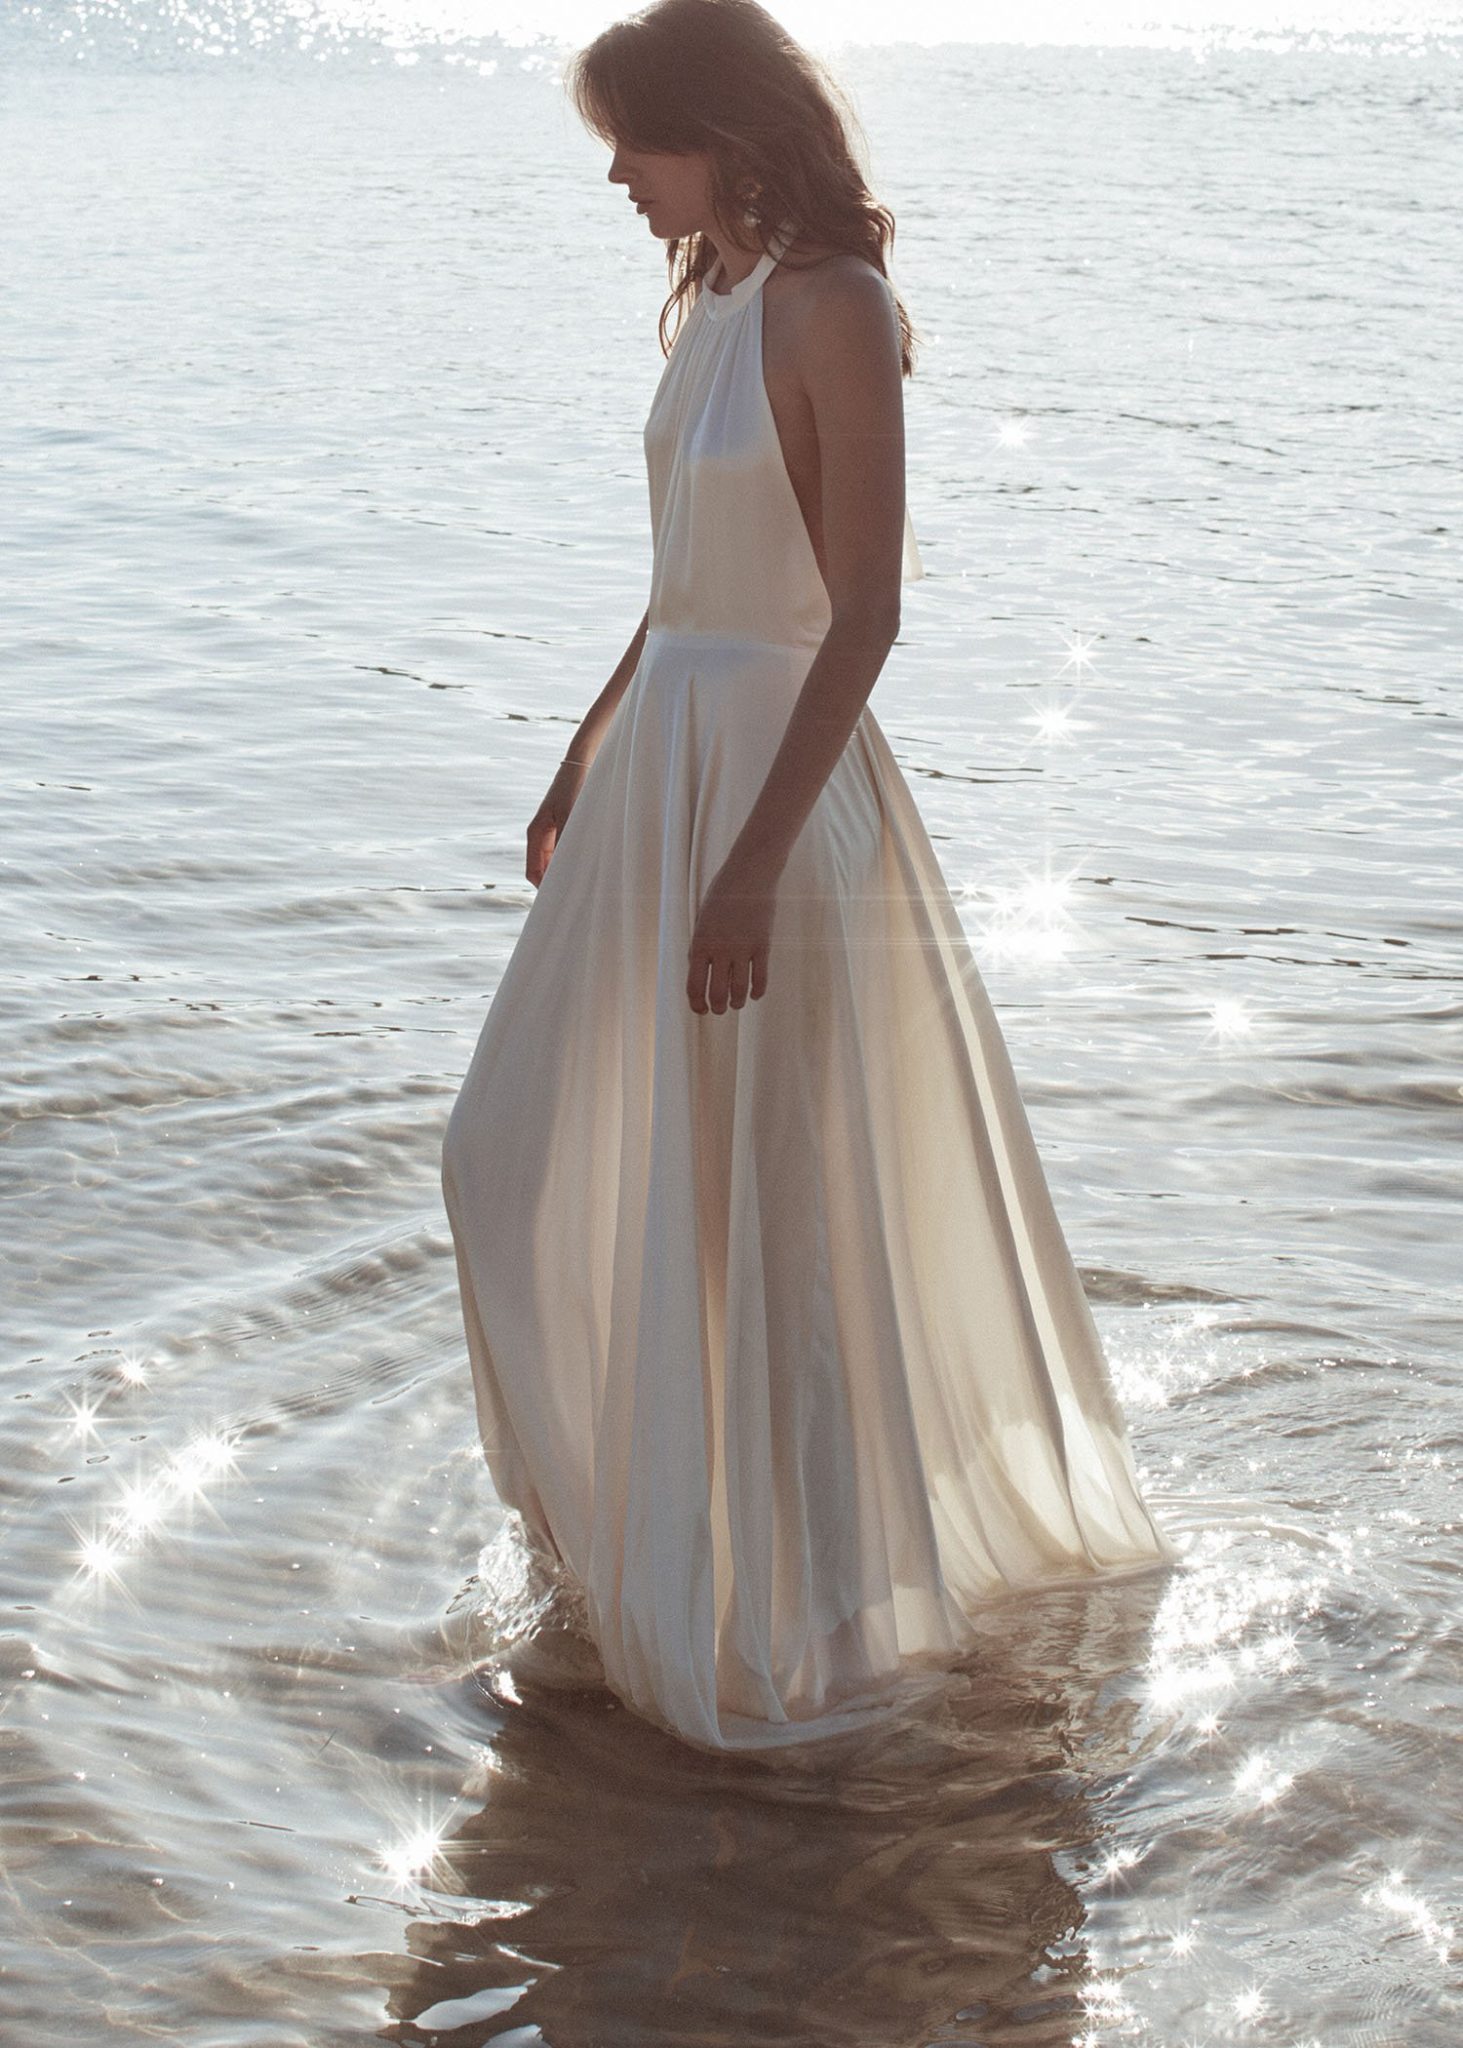 The Most Brilliant Bridal Trends for 2023 - high kneck/halter wedding gowns